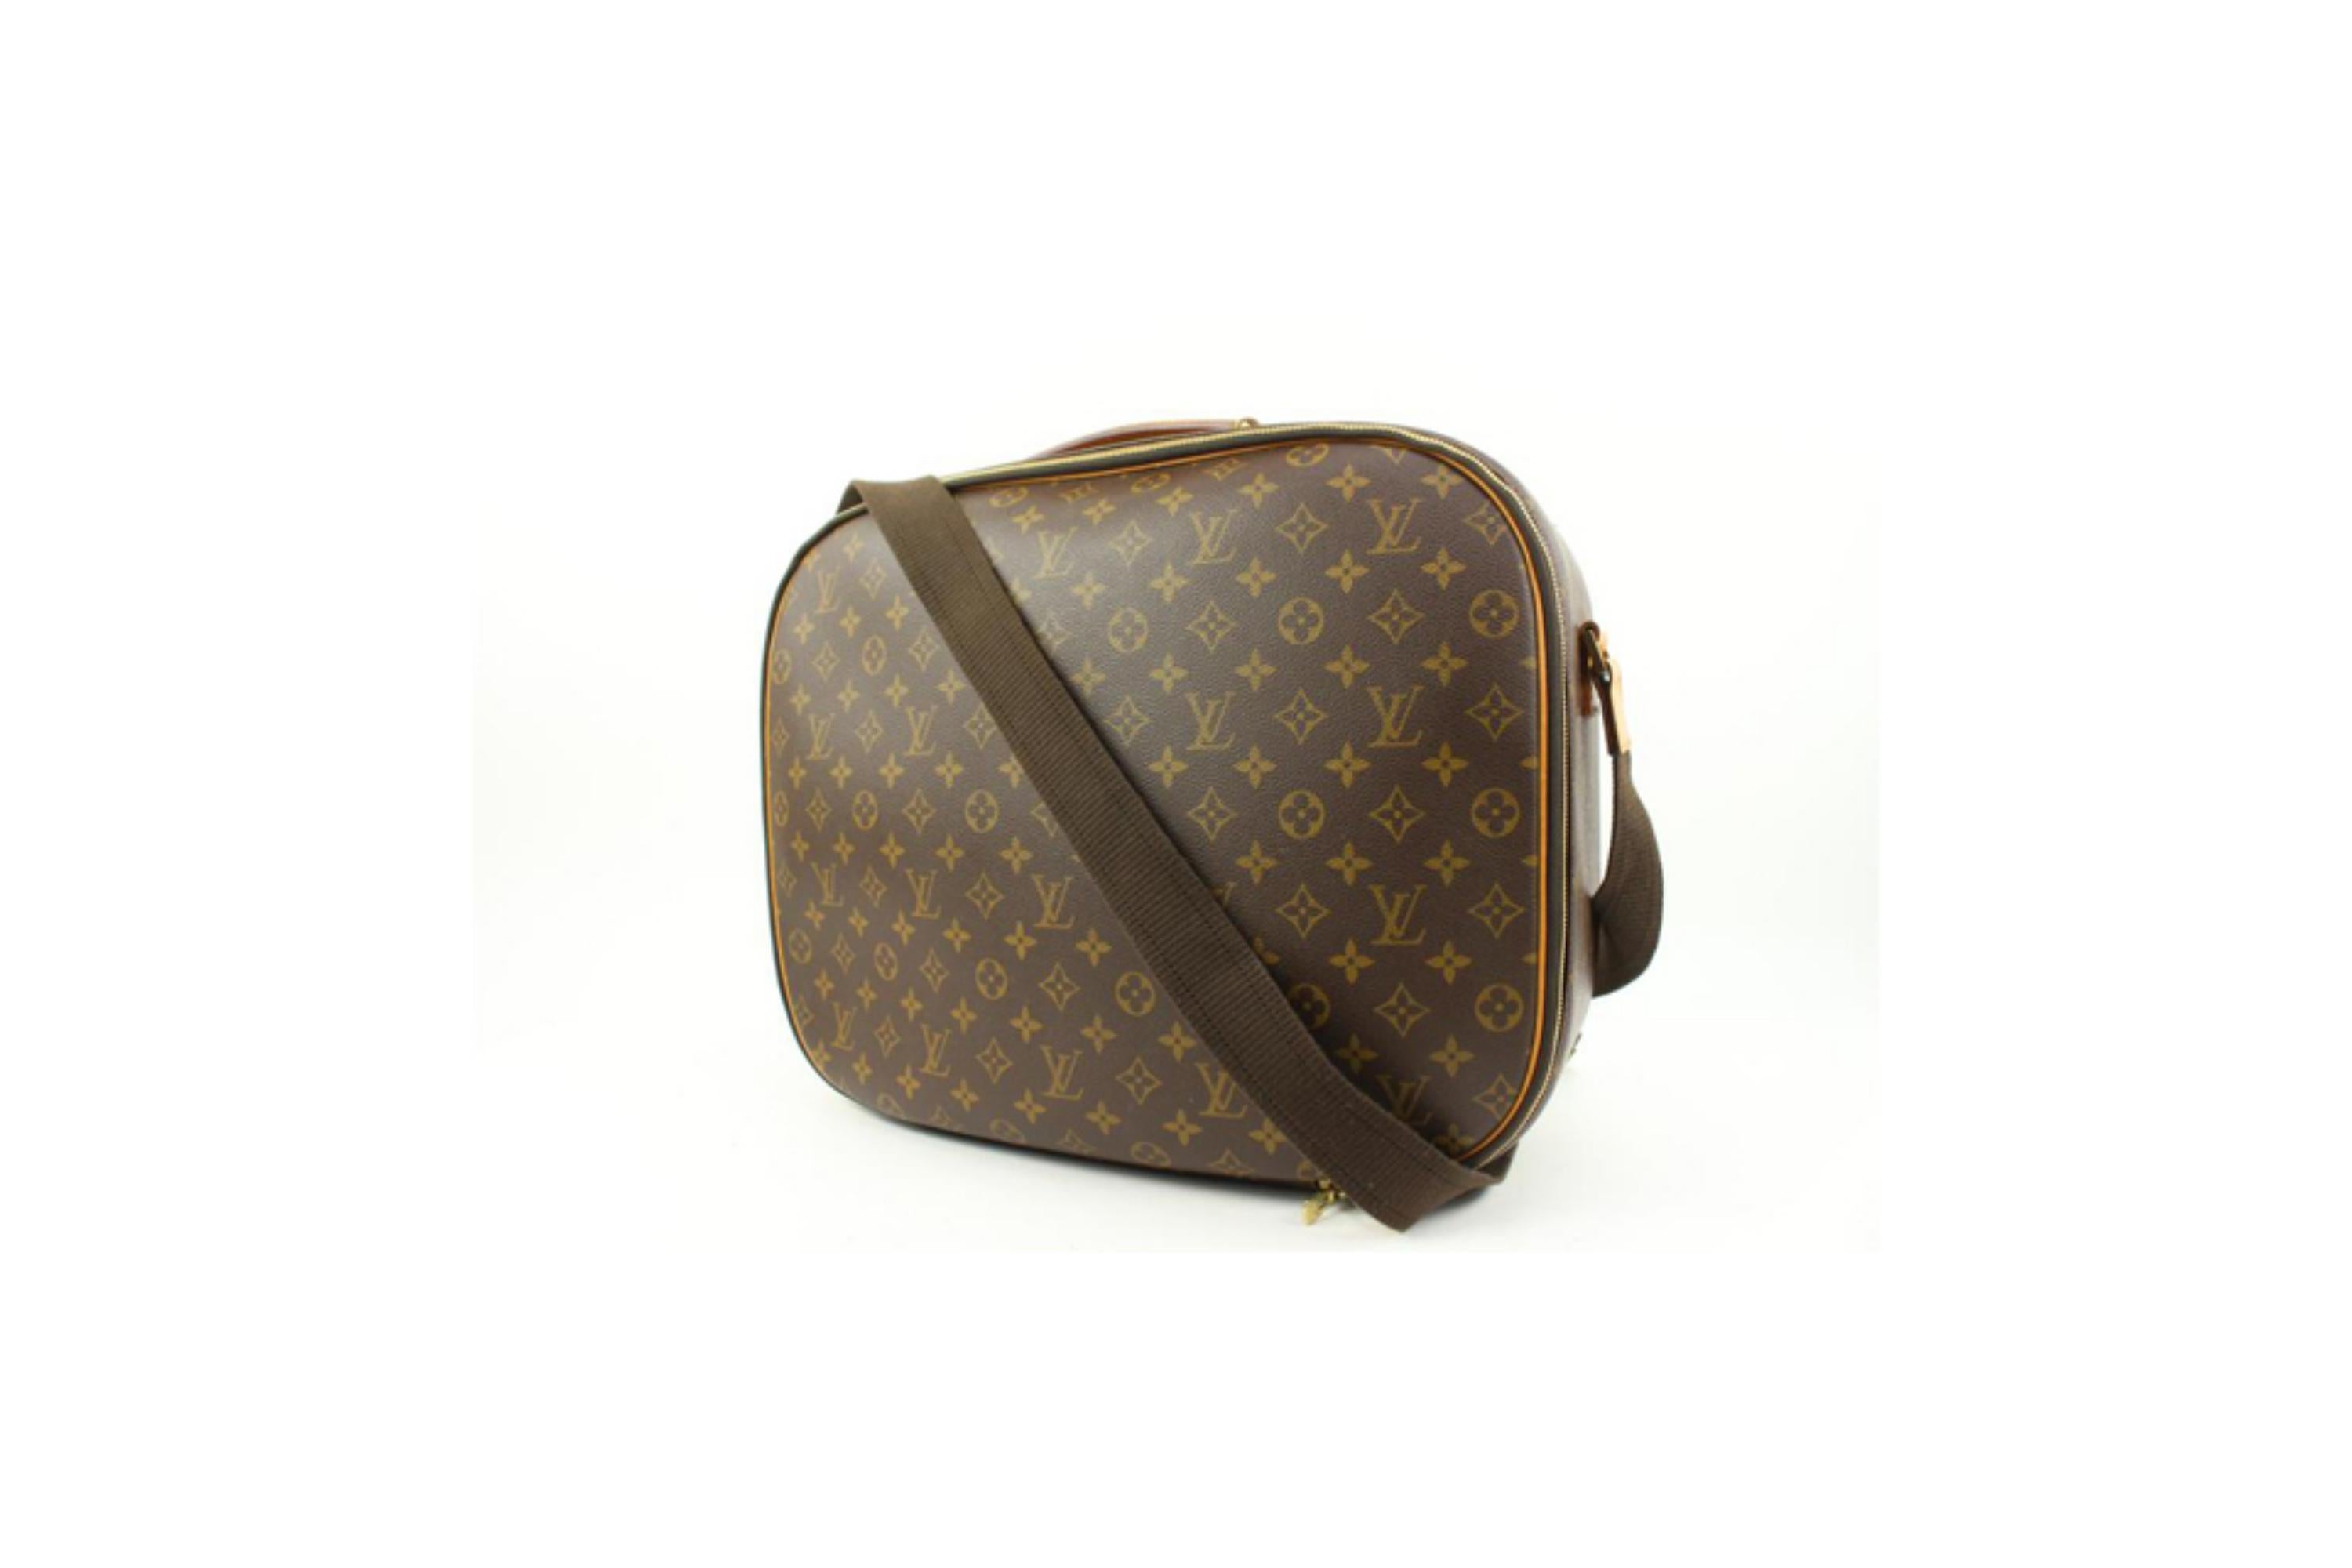 Louis Vuitton Discontinued Monogram Packall PM 2way Bandouliere Trunk 64lv23s
Date Code/Serial Number: BA1000
Made In: France
Measurements: Length:  17.5